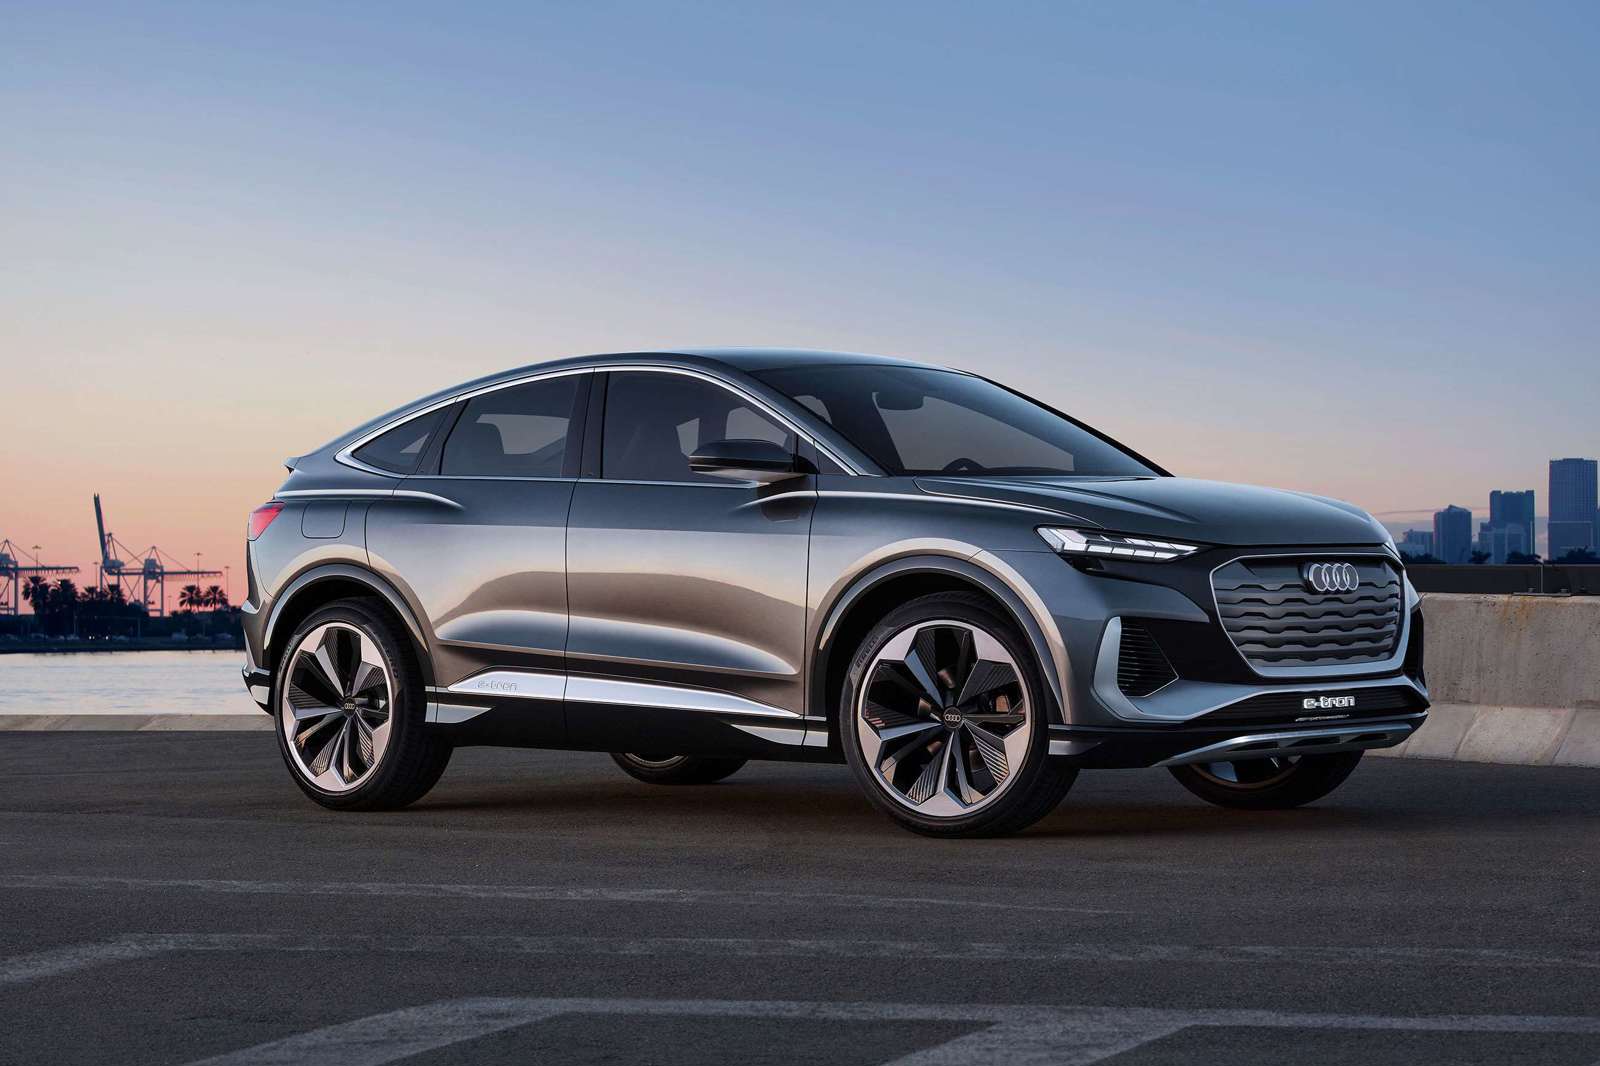 The Q4 etron is Audi’s new junior electric SUV GRR